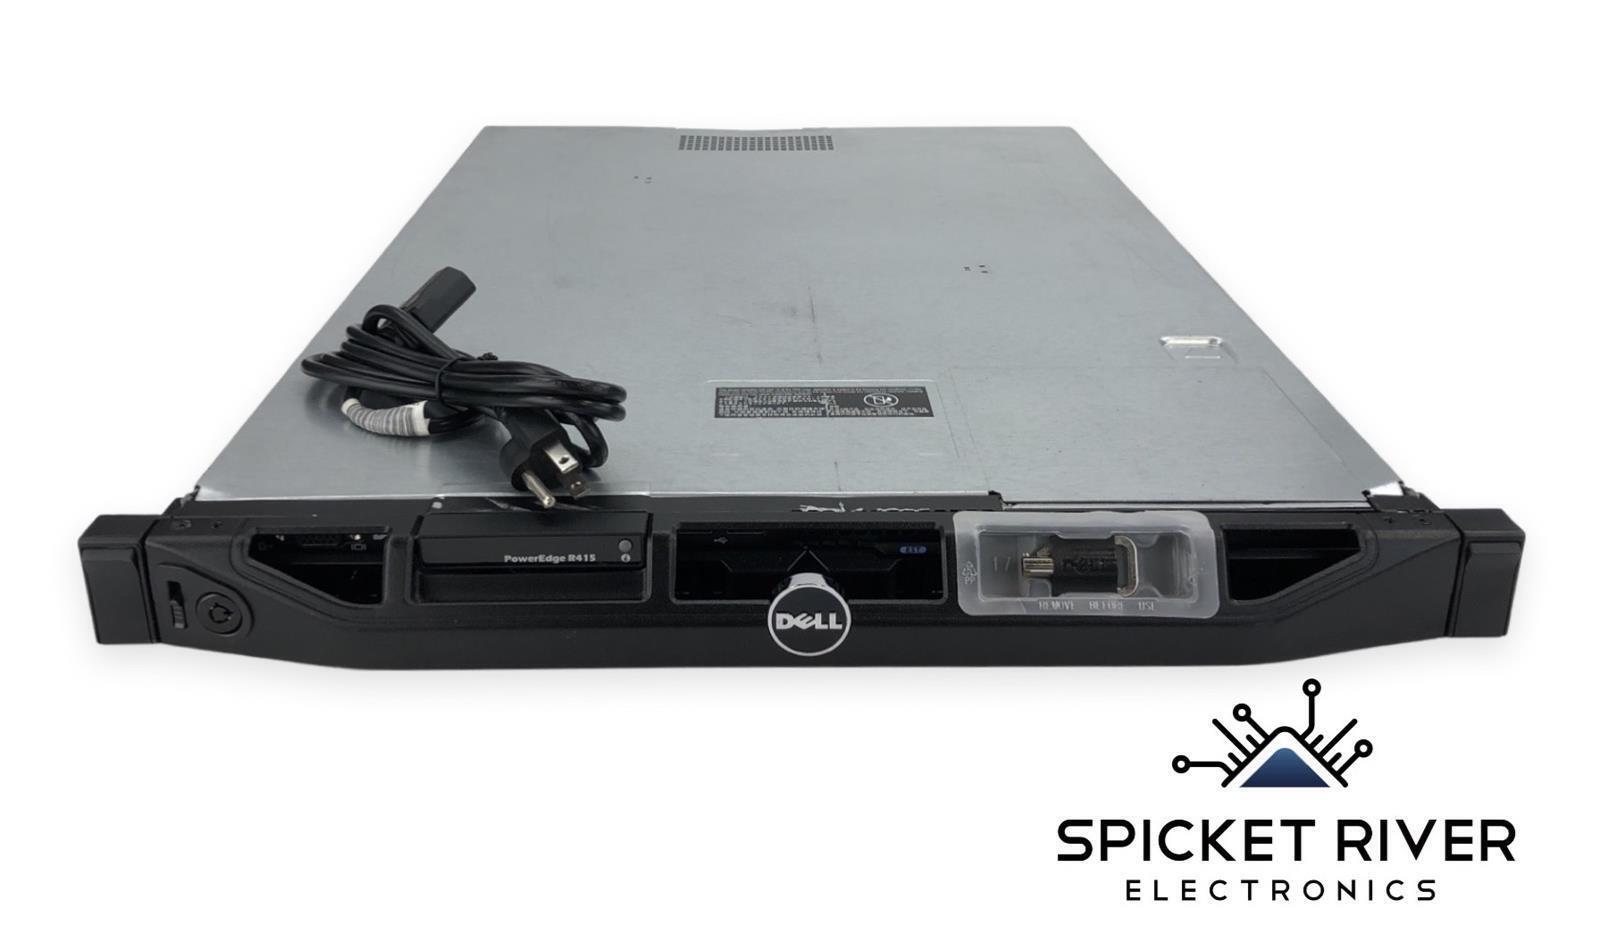 Dell PowerEdge R415 2x 8-Core AMD Opteron 4284 3.00GHz 64GB RAM 1x 480W No HDDs